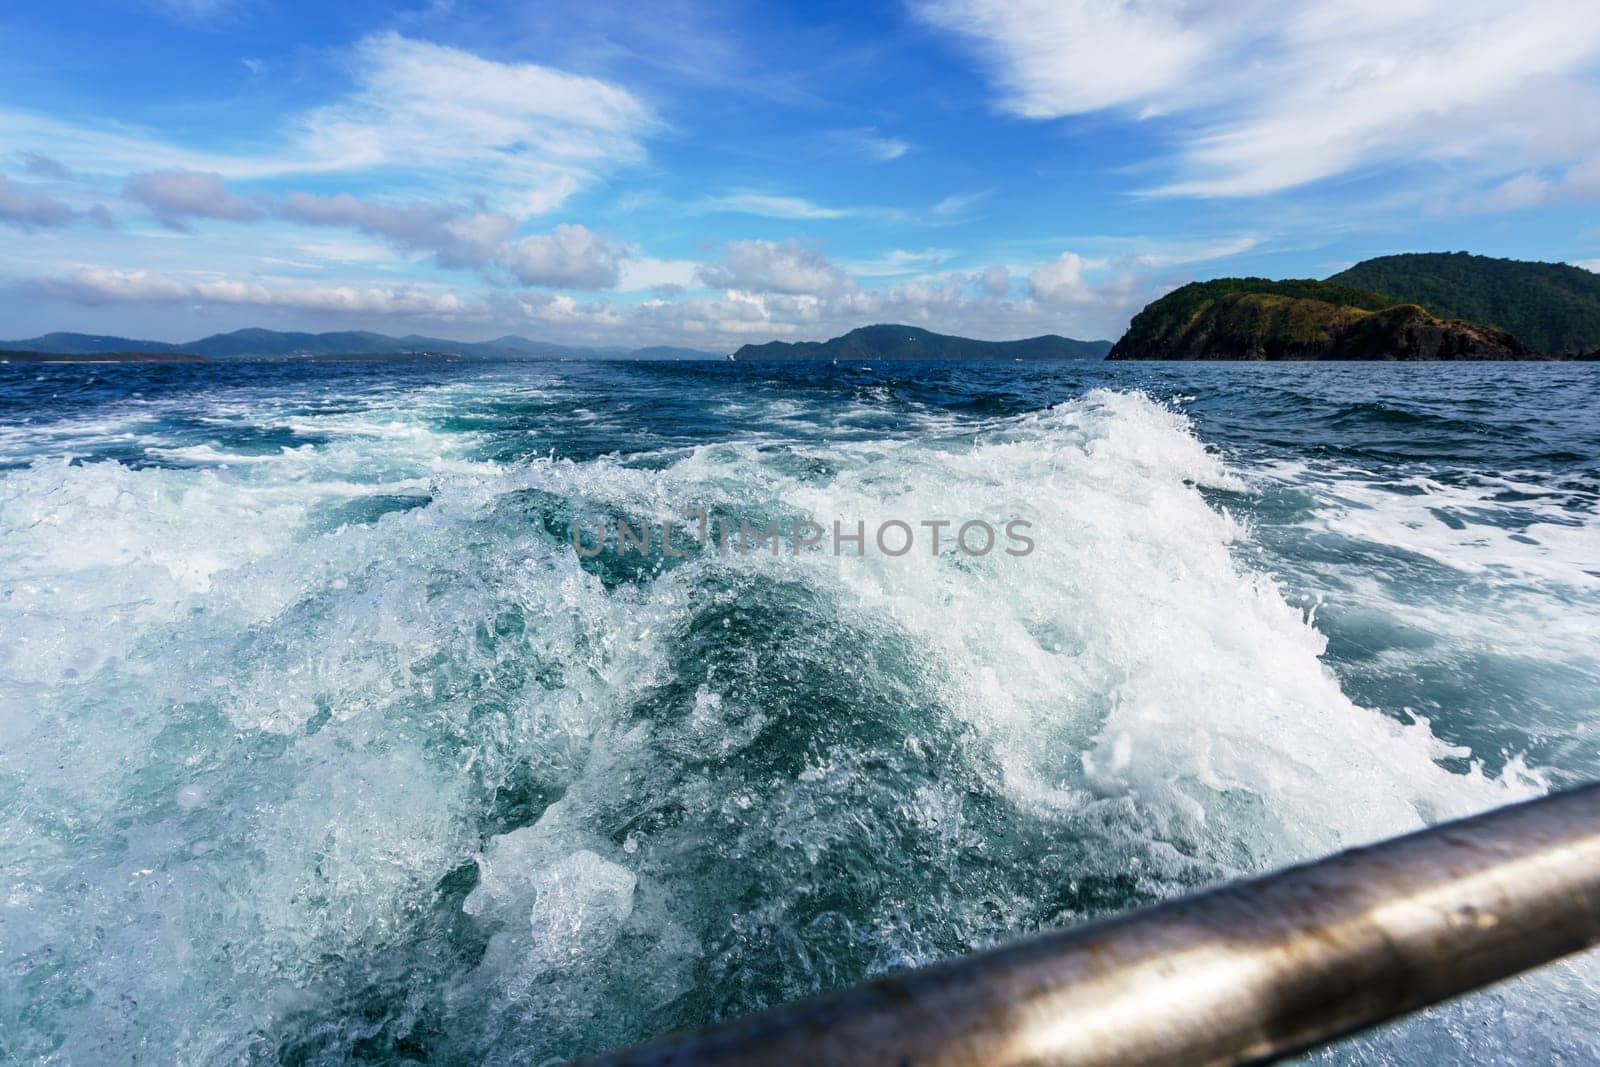 Seascape while boating. Image of sea foam on waves. Thailand